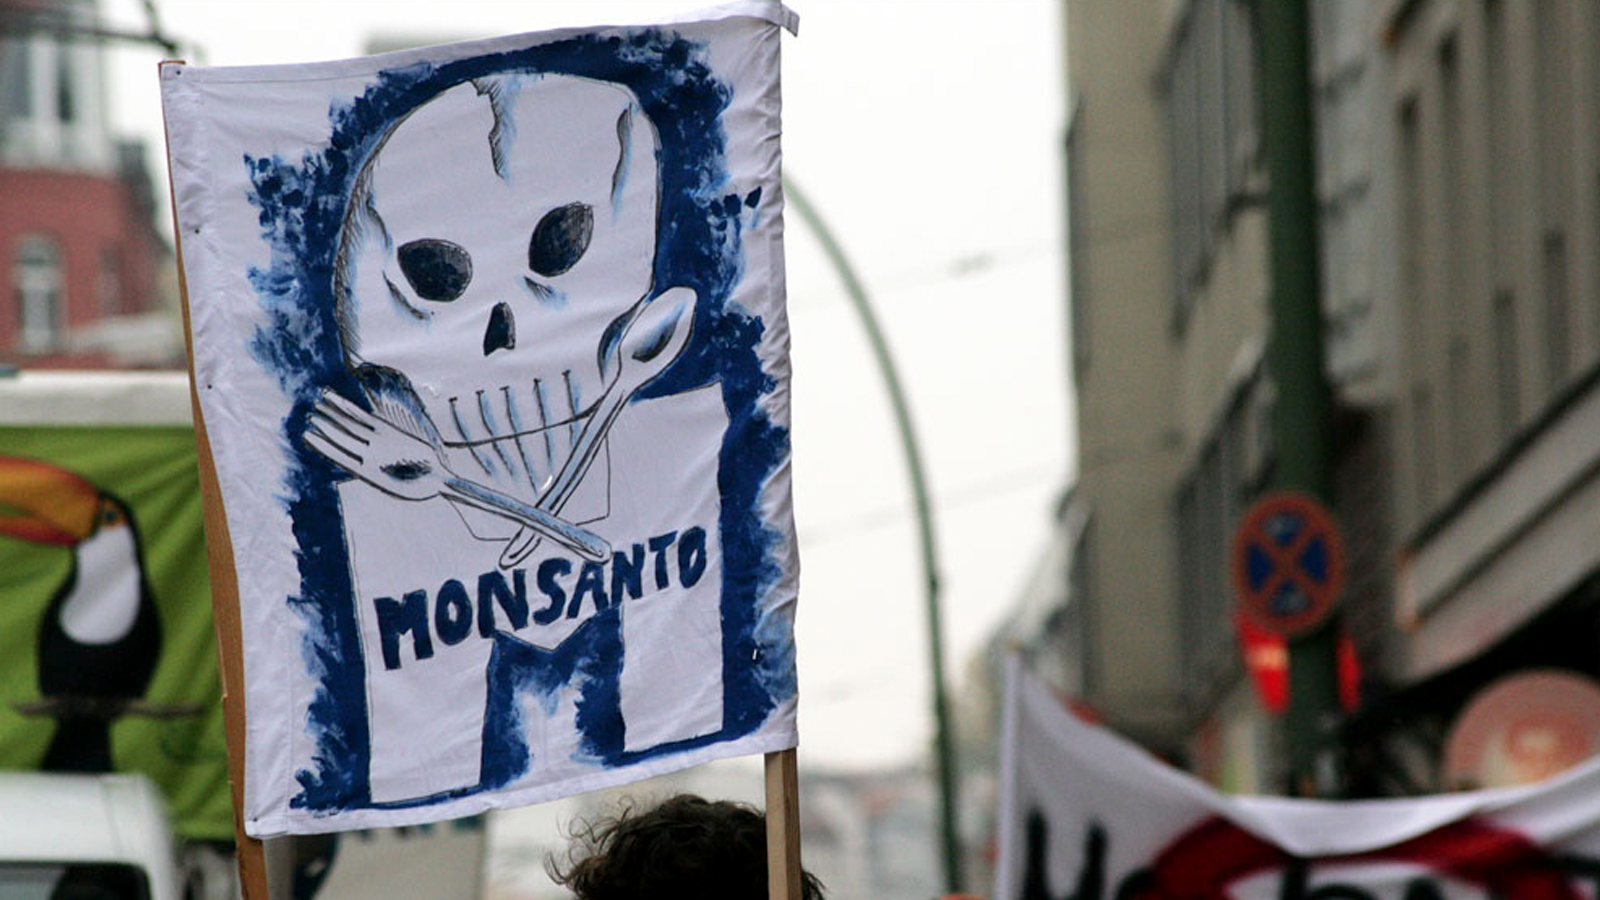 Monsanto protest sign